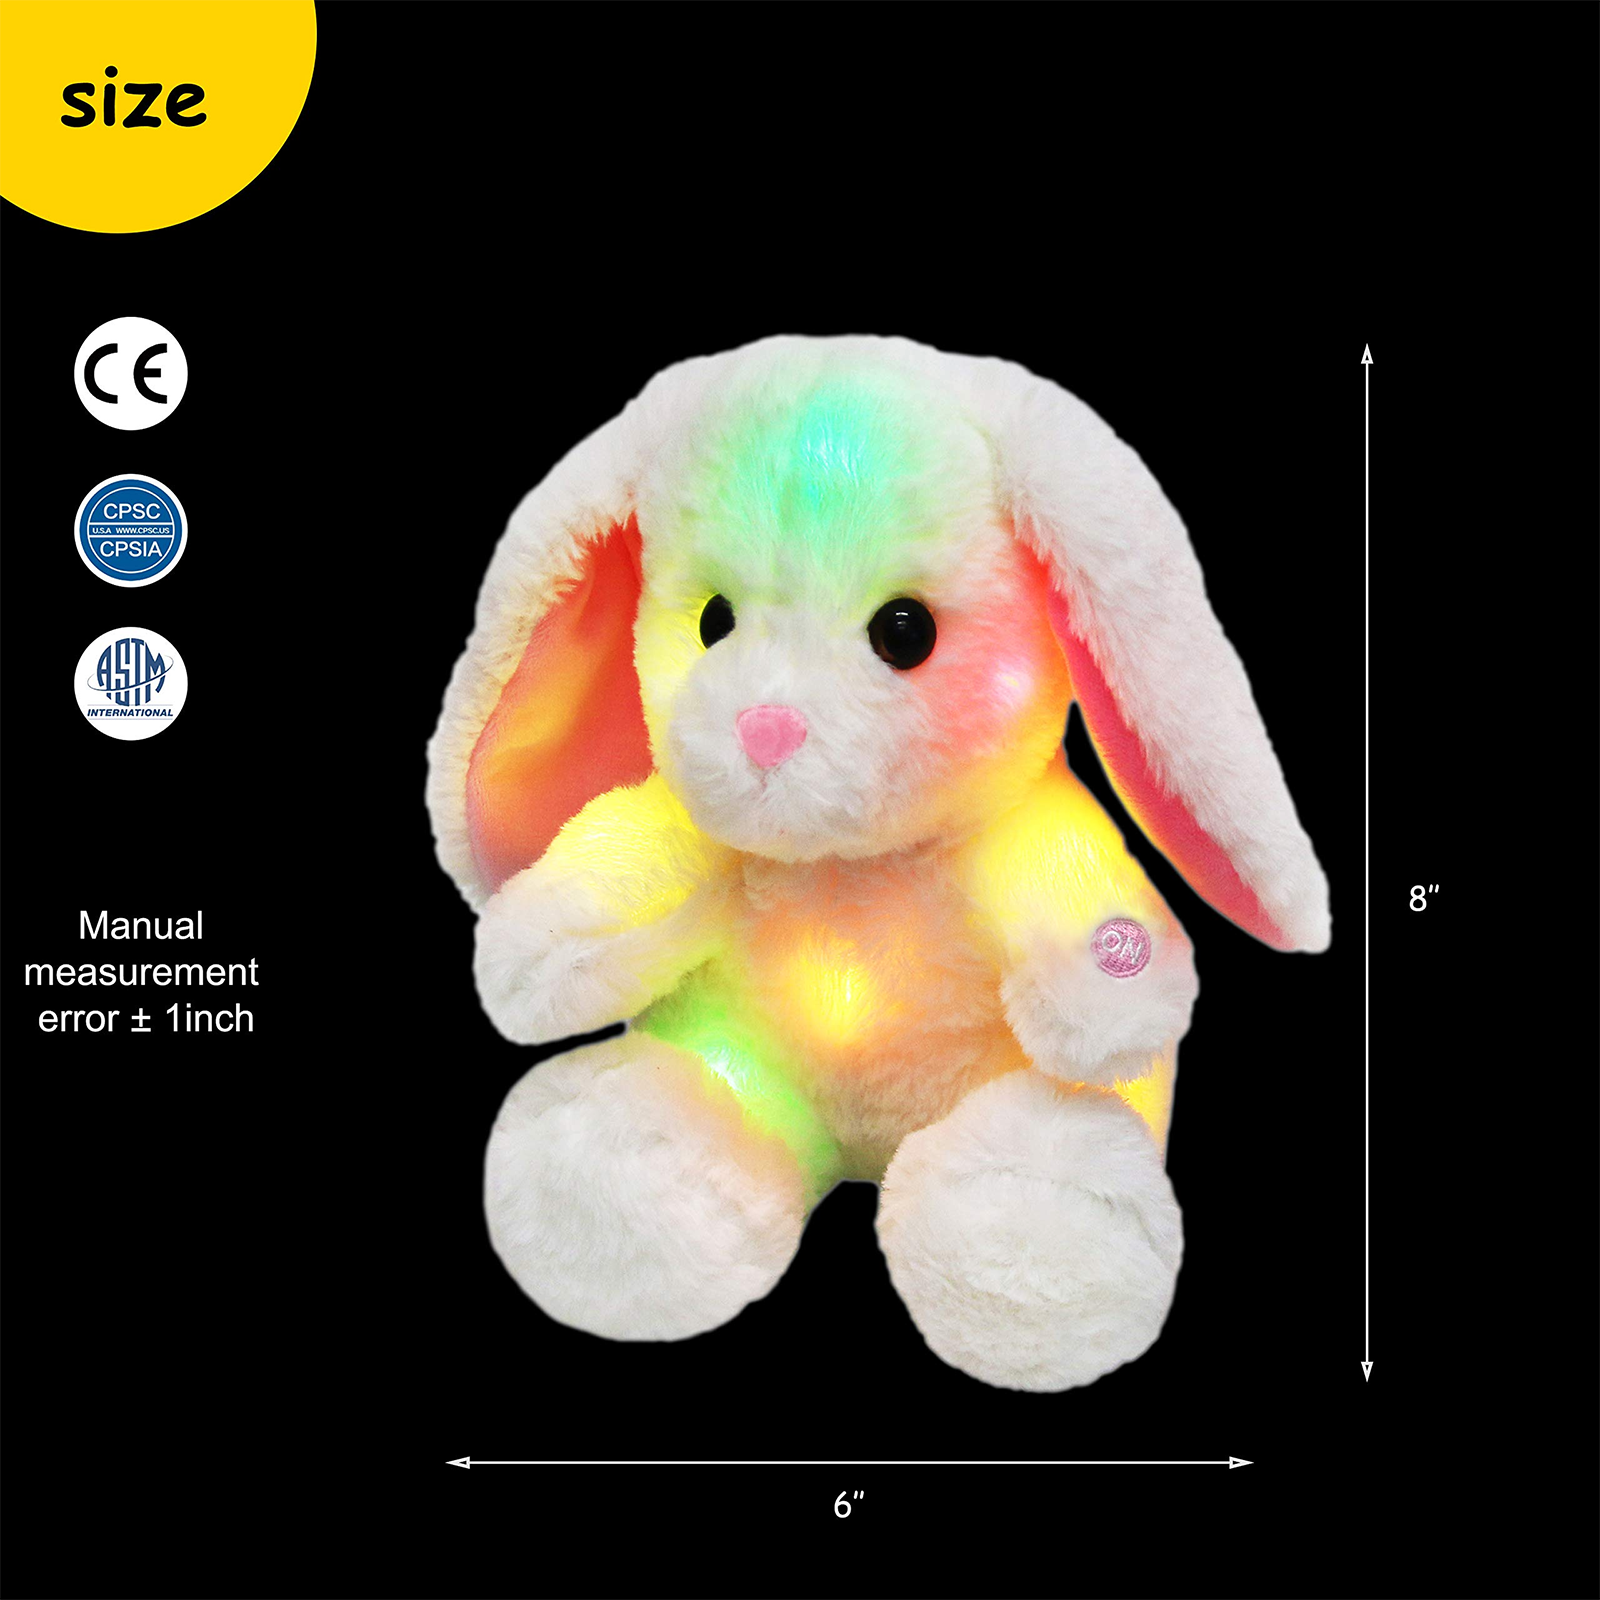 Bstaofy 8'' Light up White Bunny Soft Plush Toy LED Rabbit Lop Ear - Glow Guards